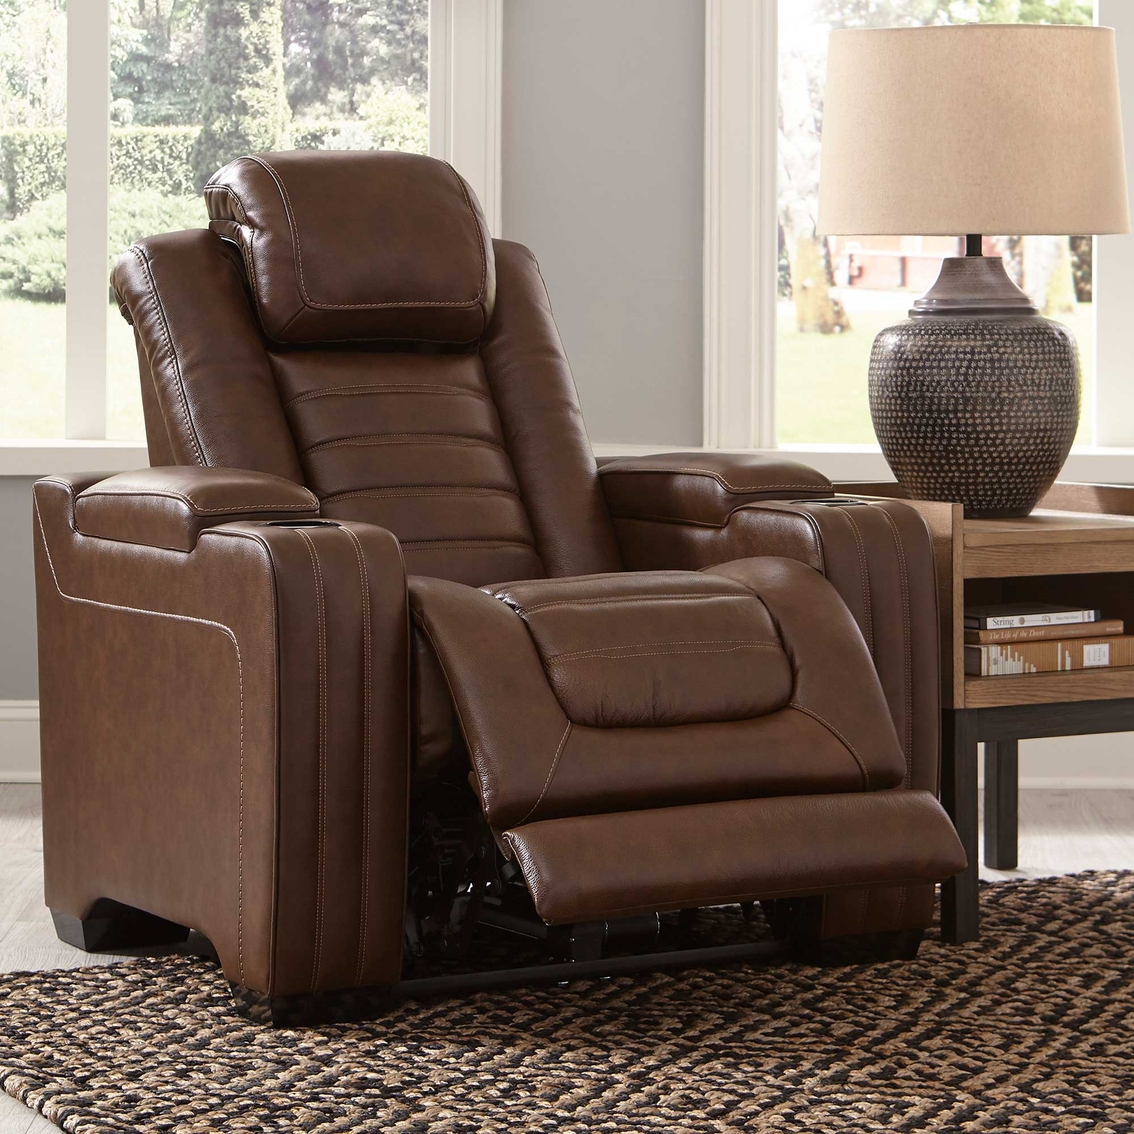 Signature Design by Ashley Backtrack Power Recliner with Adjustable Headrest - Image 6 of 9